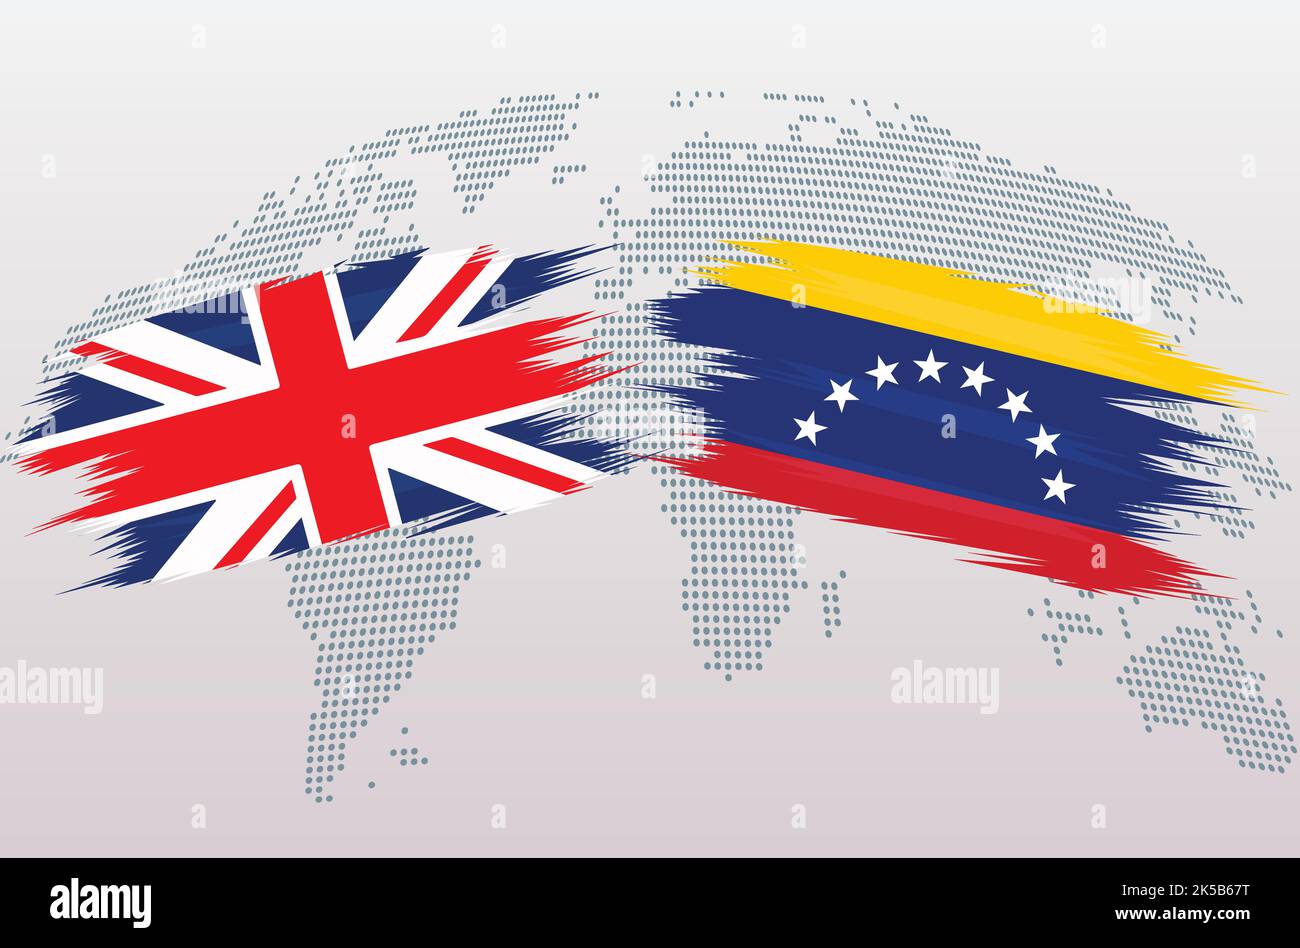 UK Great Britain and Venezuela flags. The United Kingdom vs Venezuela flags, isolated on grey world map background. Vector illustration. Stock Vector